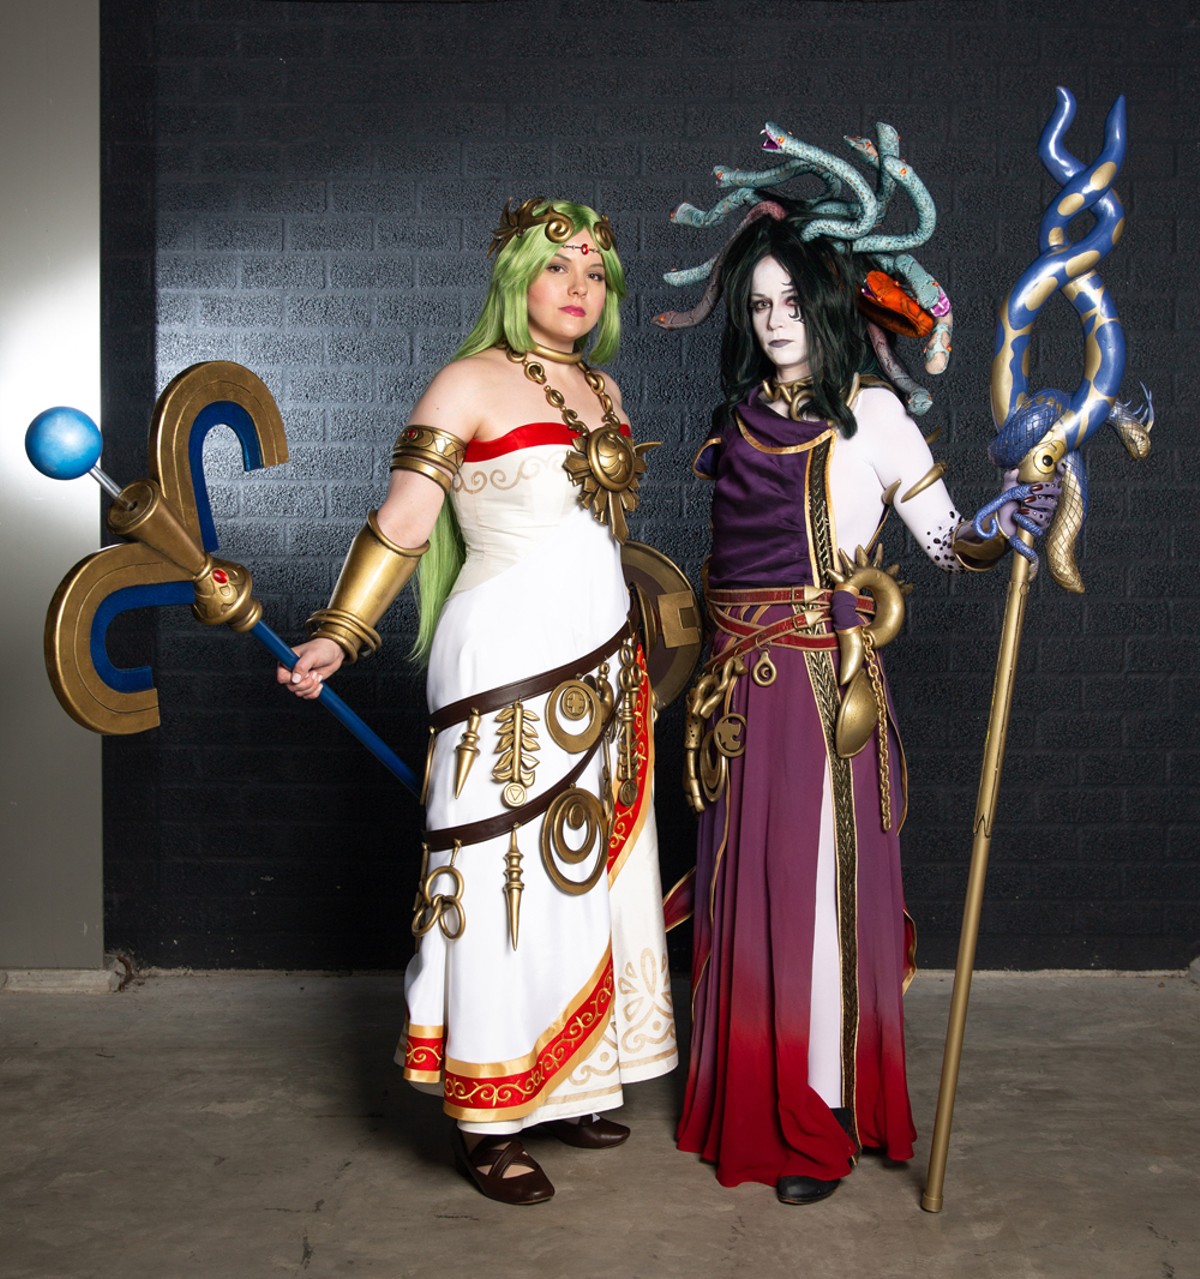 Award-winning cosplay team Sparkle Motion’s Sumikins and Rynn Cosplay dressed as Palutena and Medusa from Kid Icarus Uprising.